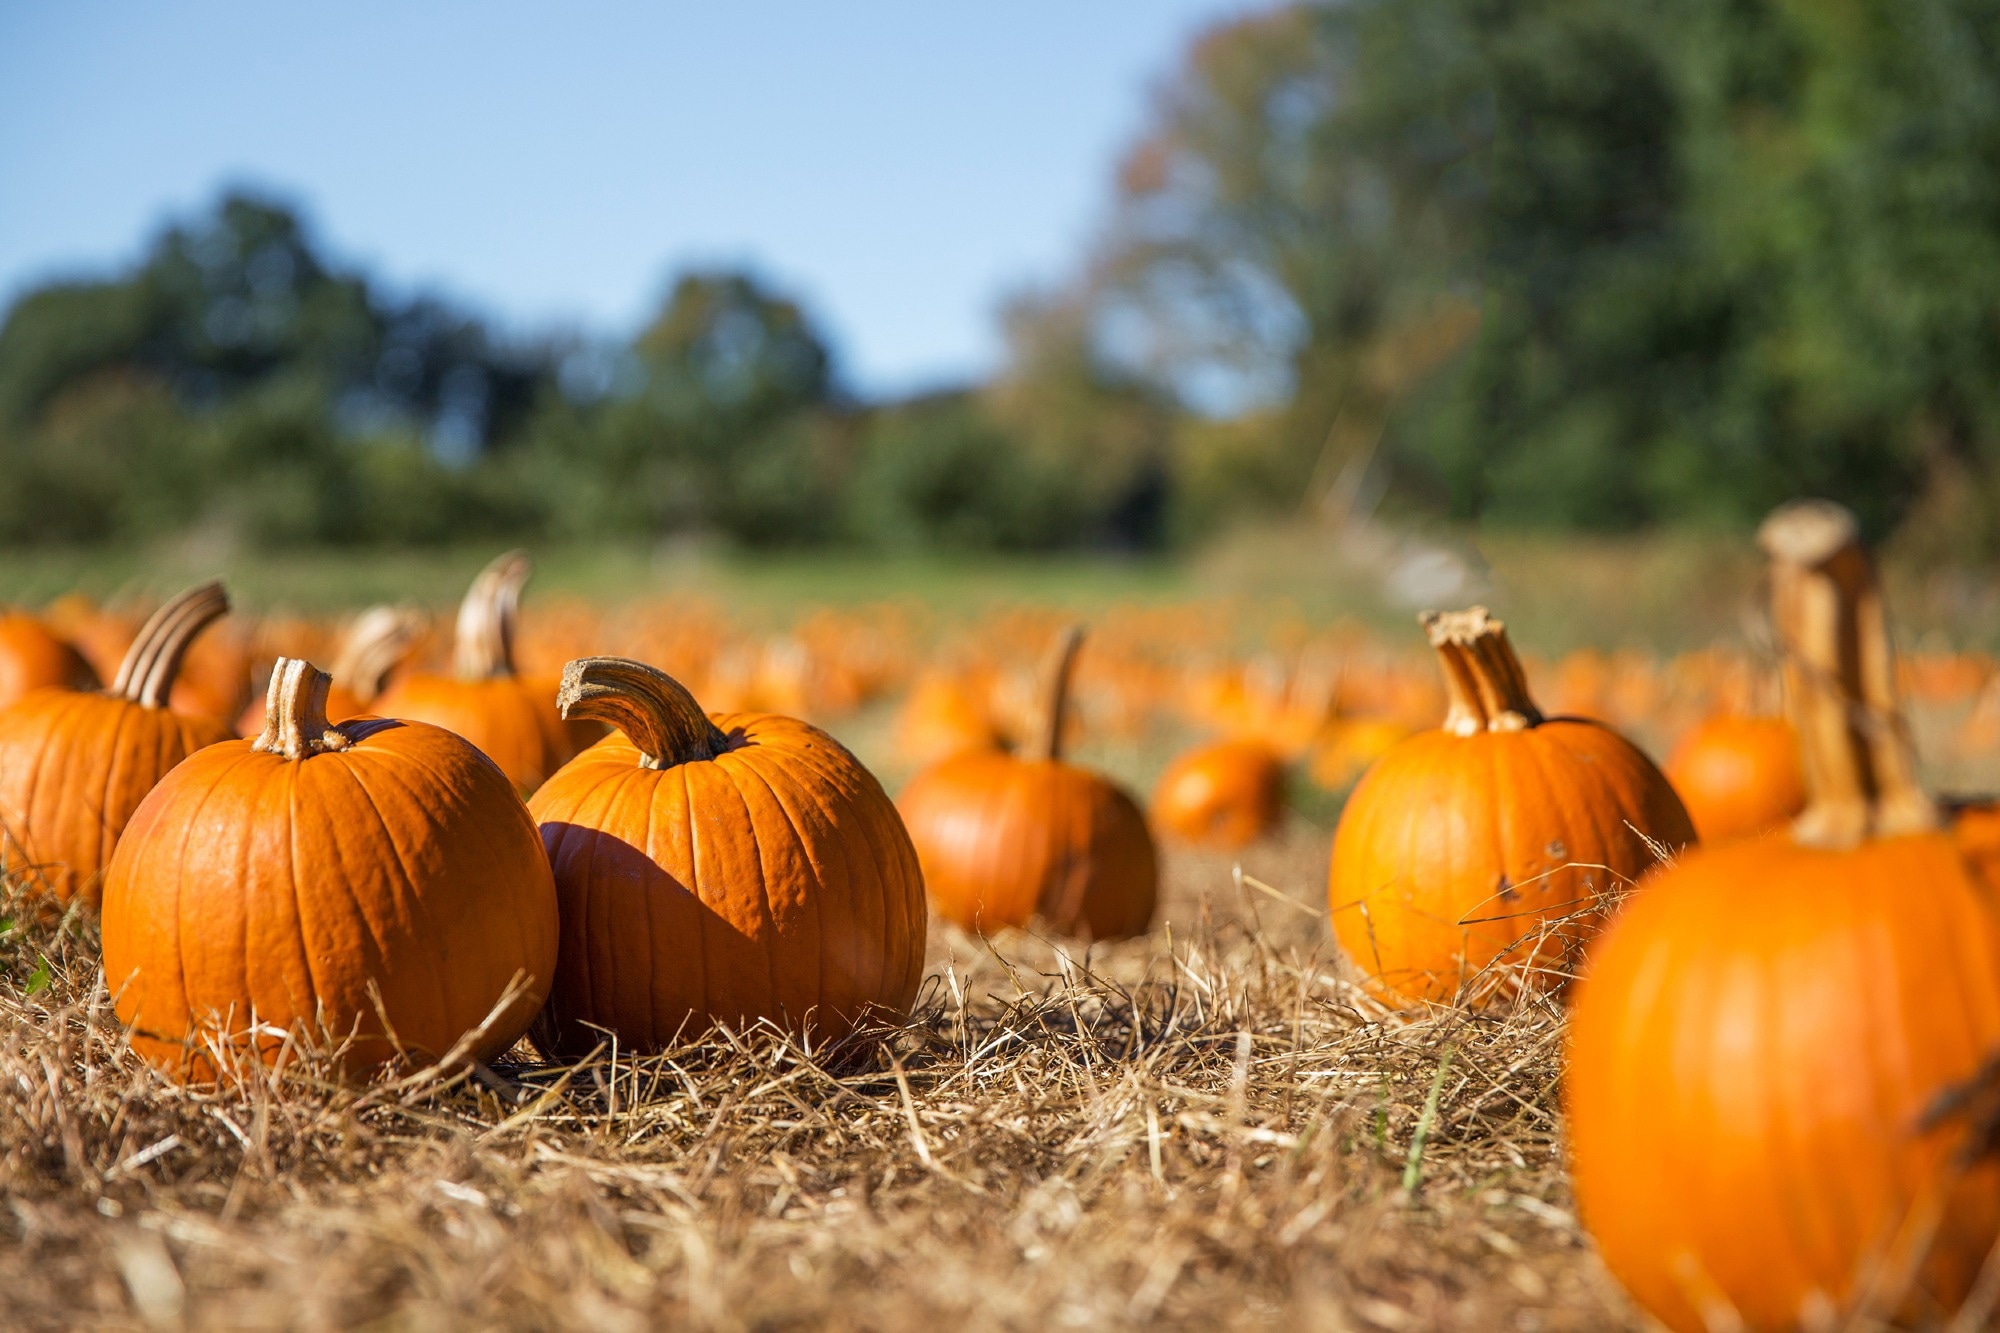 Study: Biological Activity of Pumpkin Byproducts: Antimicrobial and Antioxidant Properties. Image Credit: EvgeniiAnd/Shutterstock